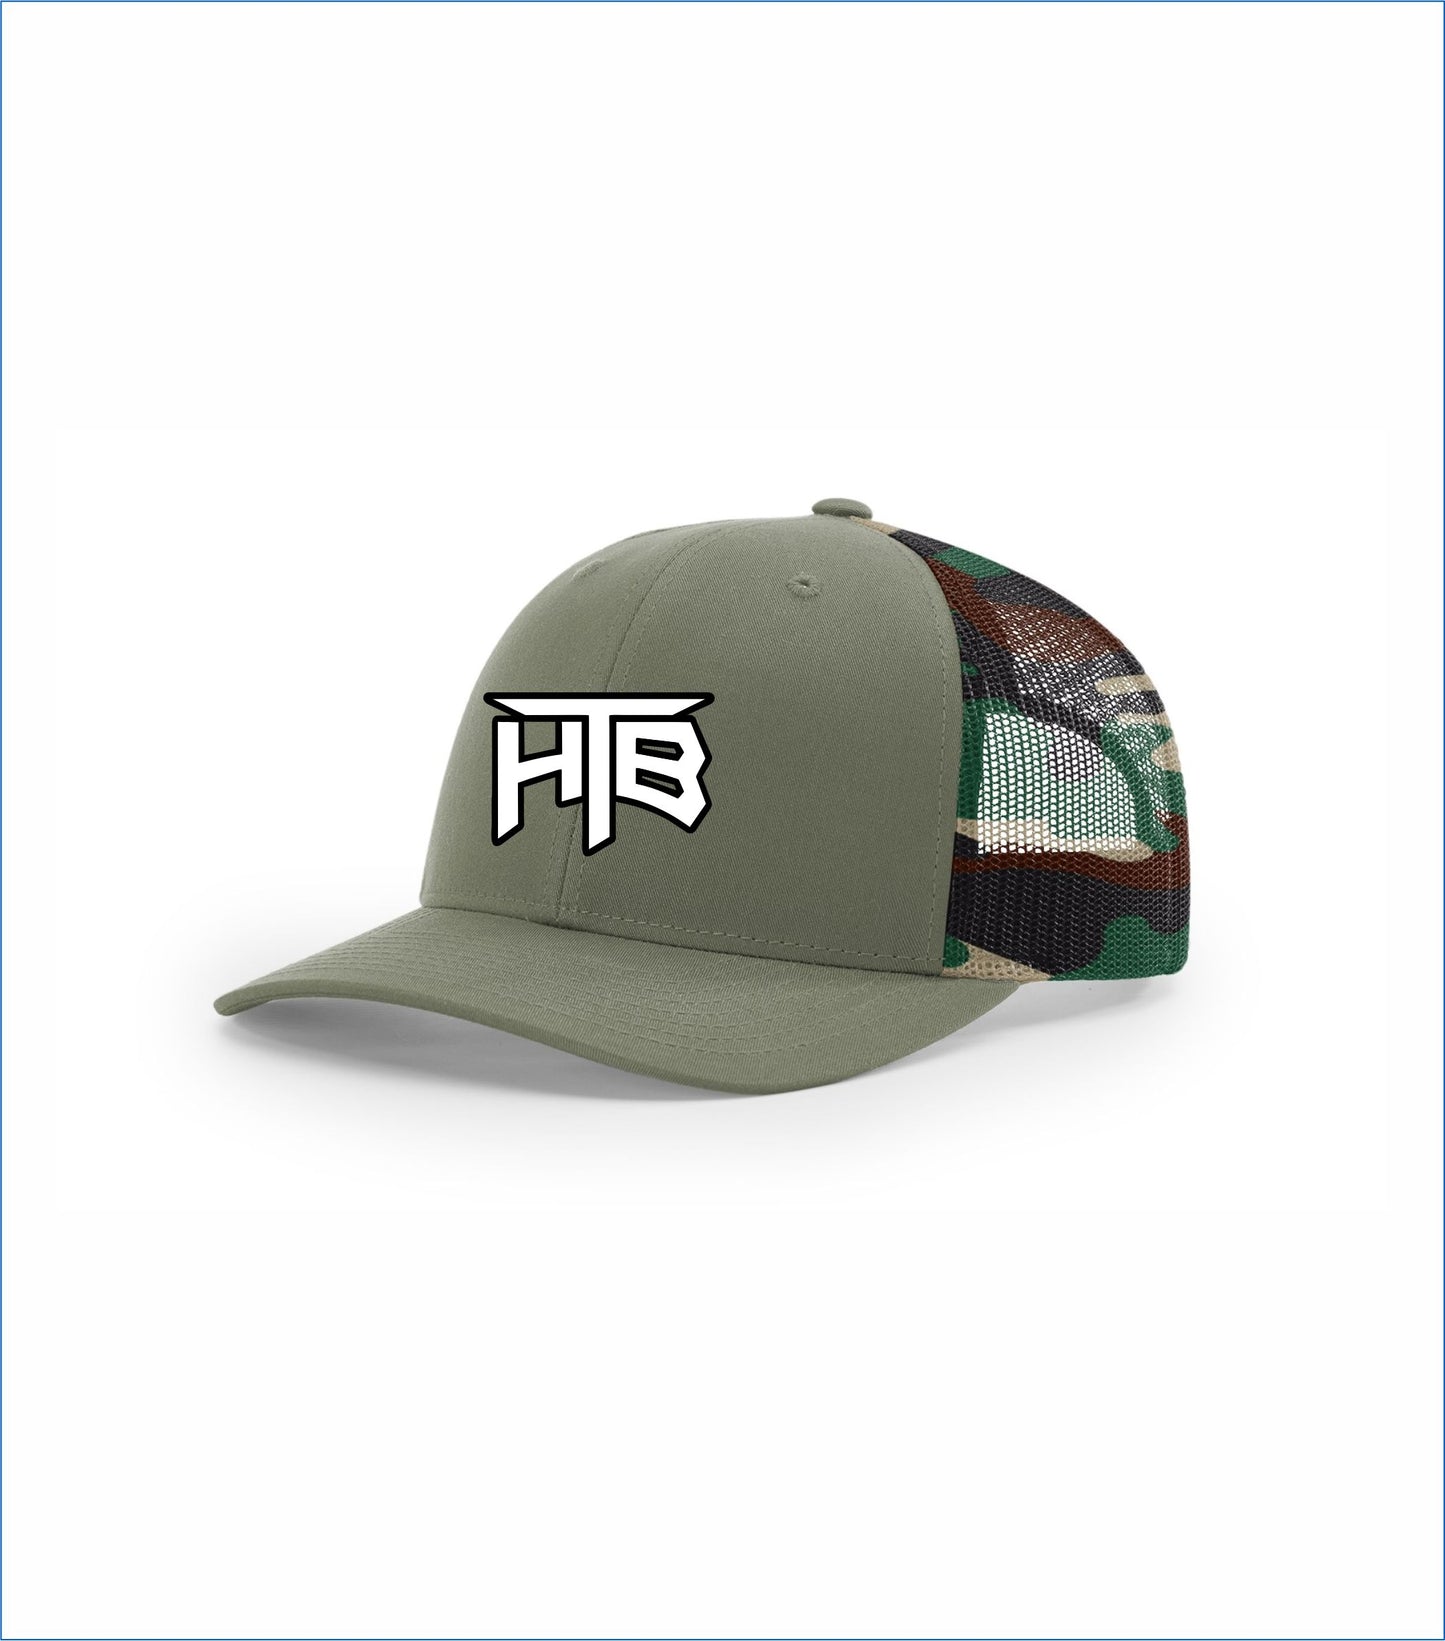 HTB Trucker Hat with Embroidered Logo